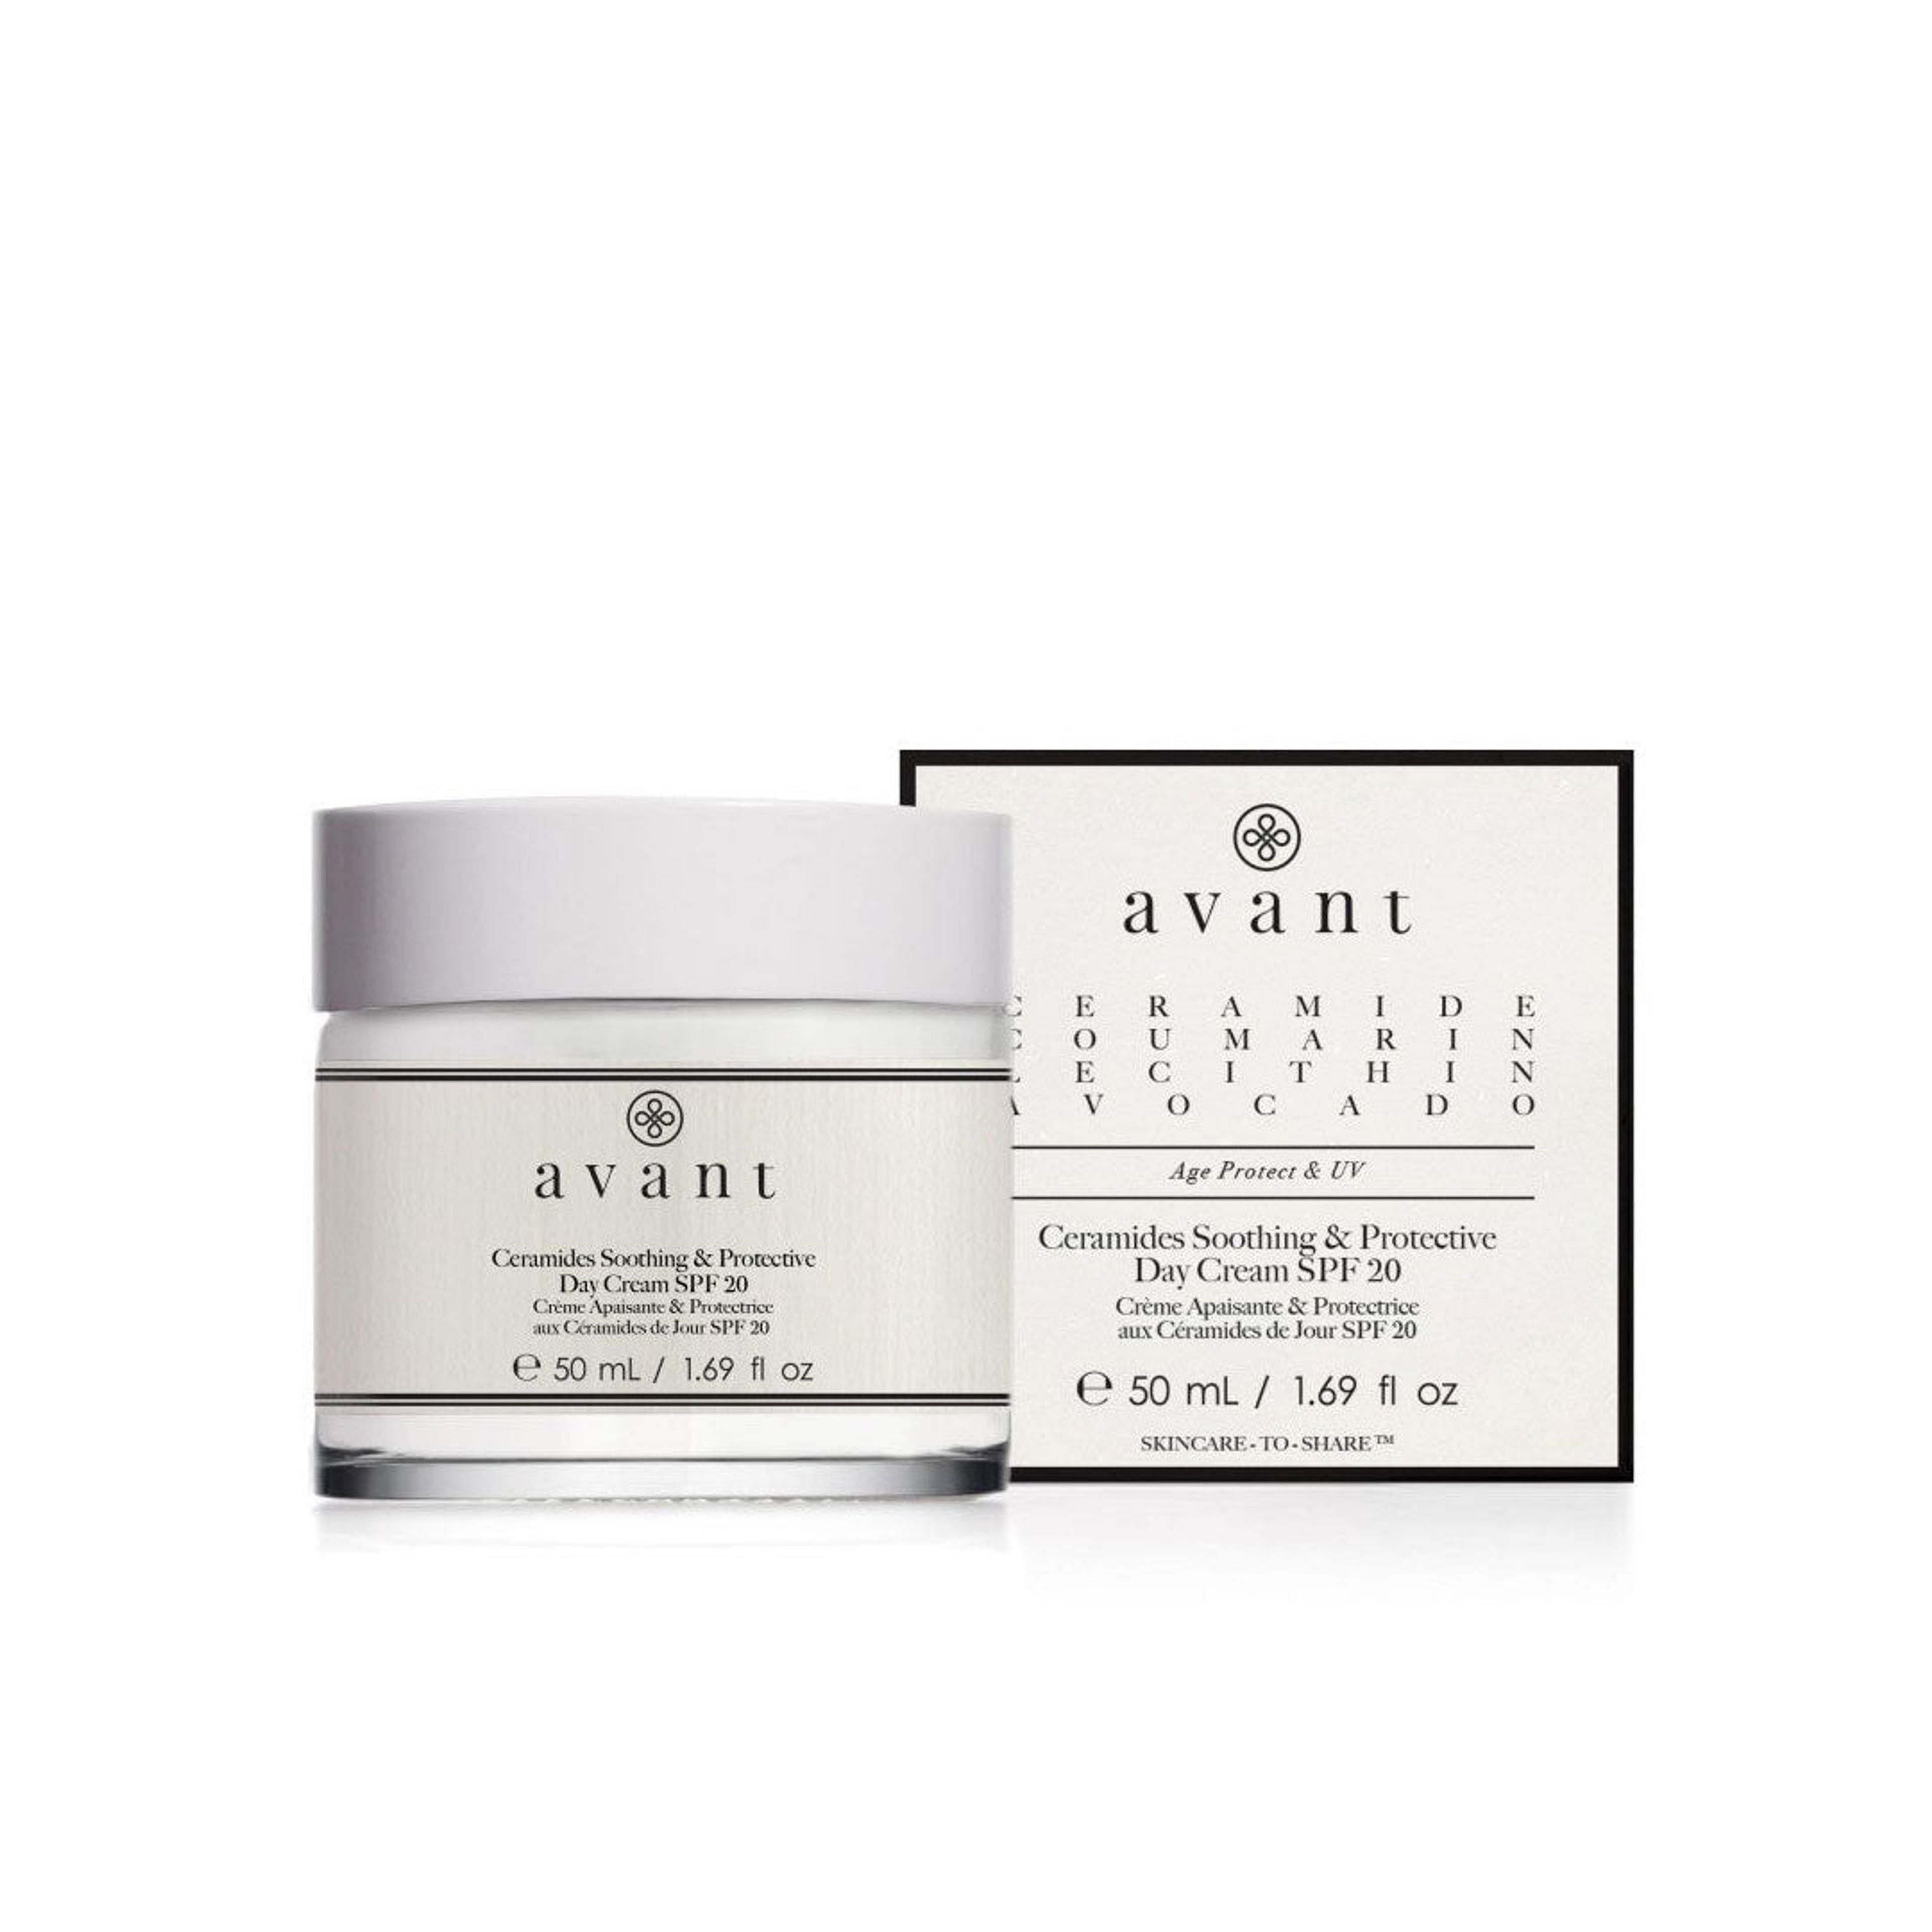  Ceramides Soothing & Protective Day Cream SPF 20